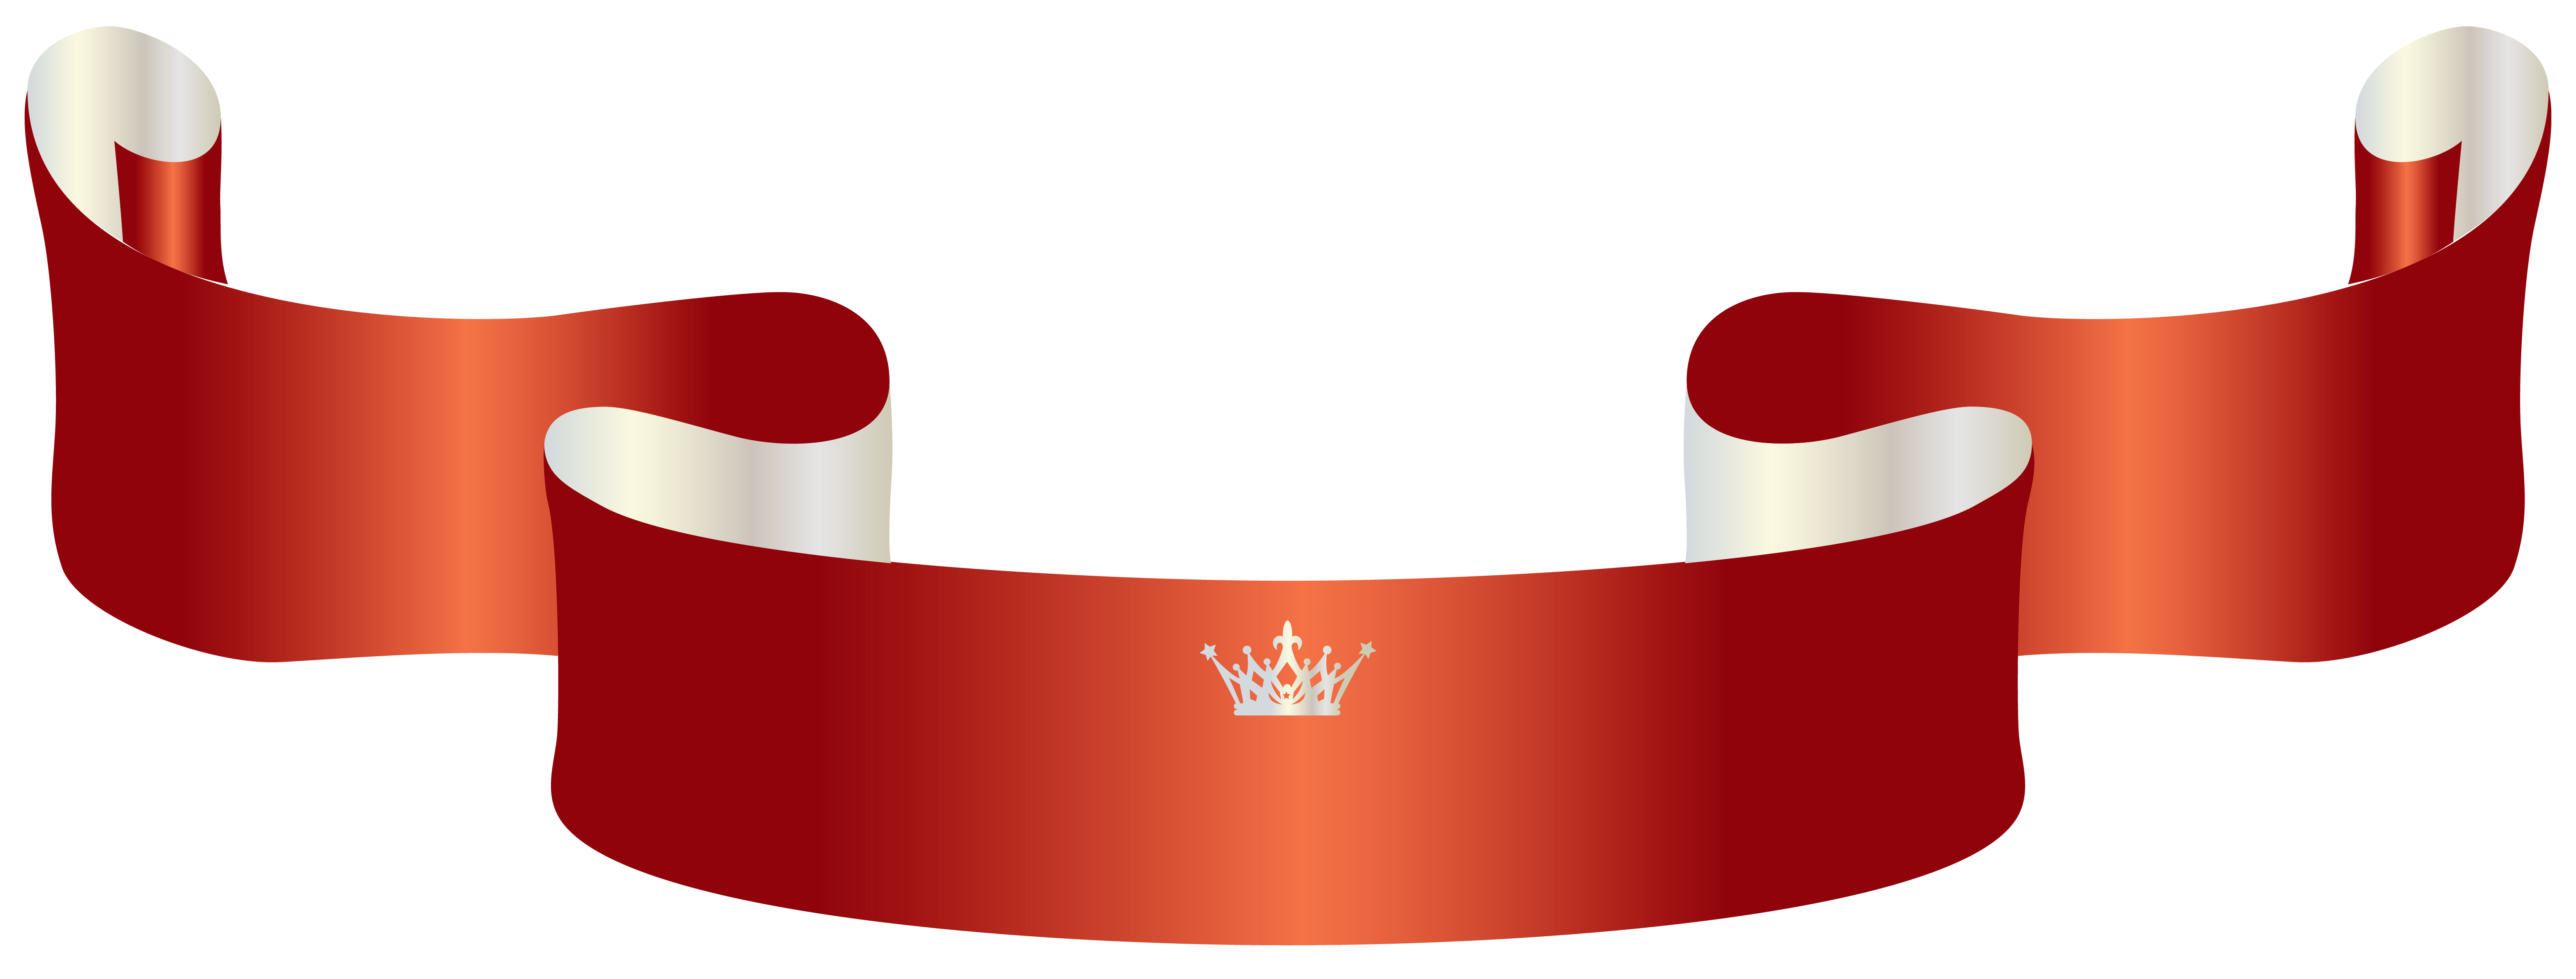 crowns clipart red